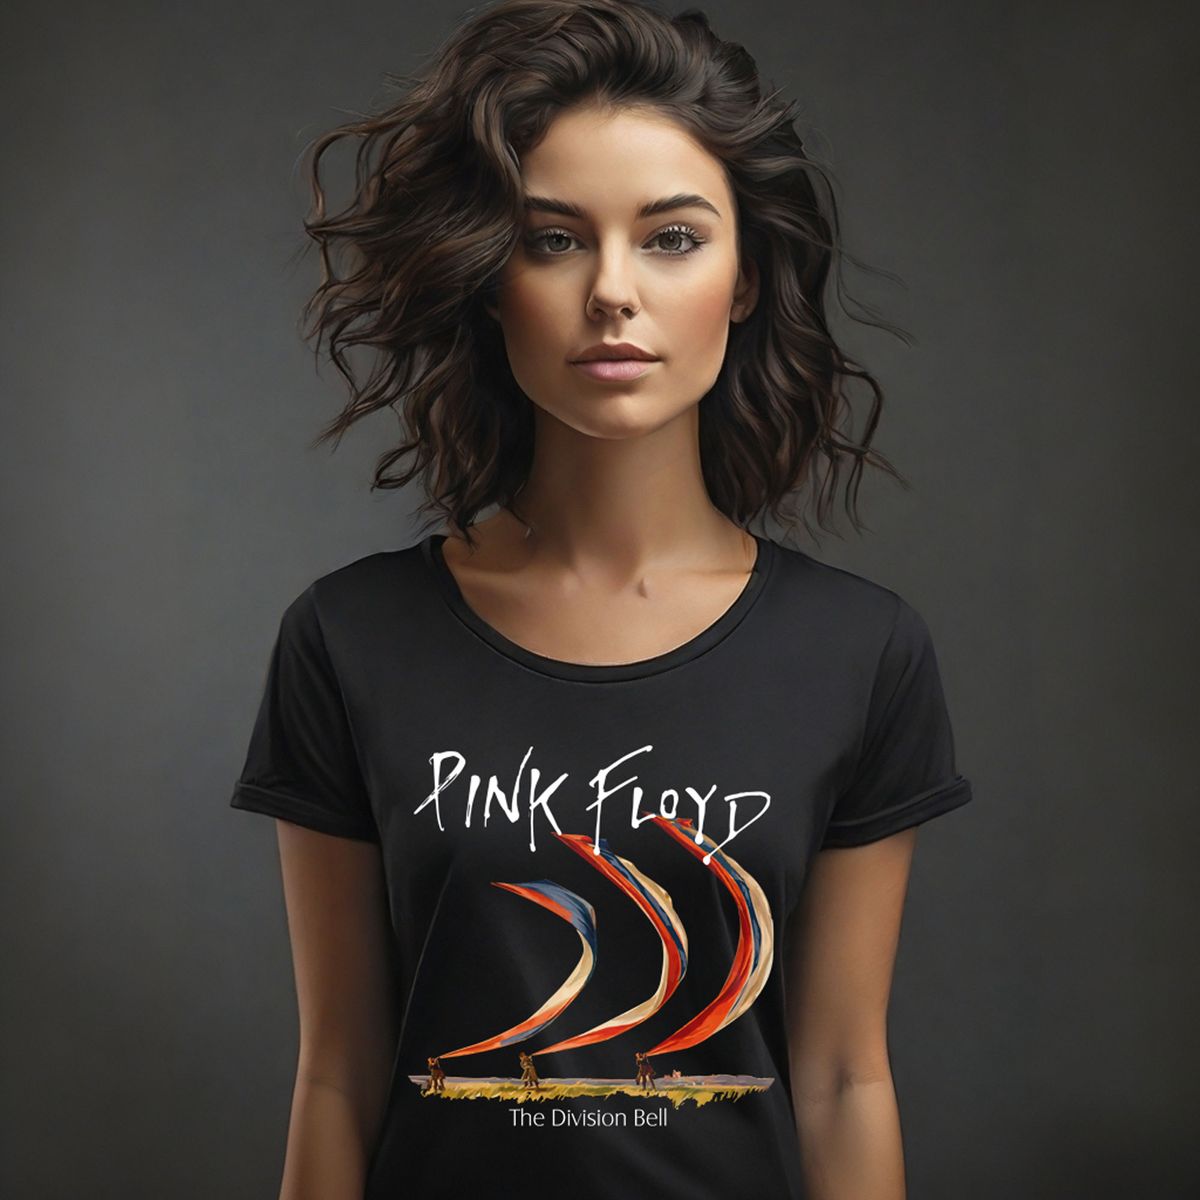 Nome do produto: Baby Long Pink Floyd - The Division Bell